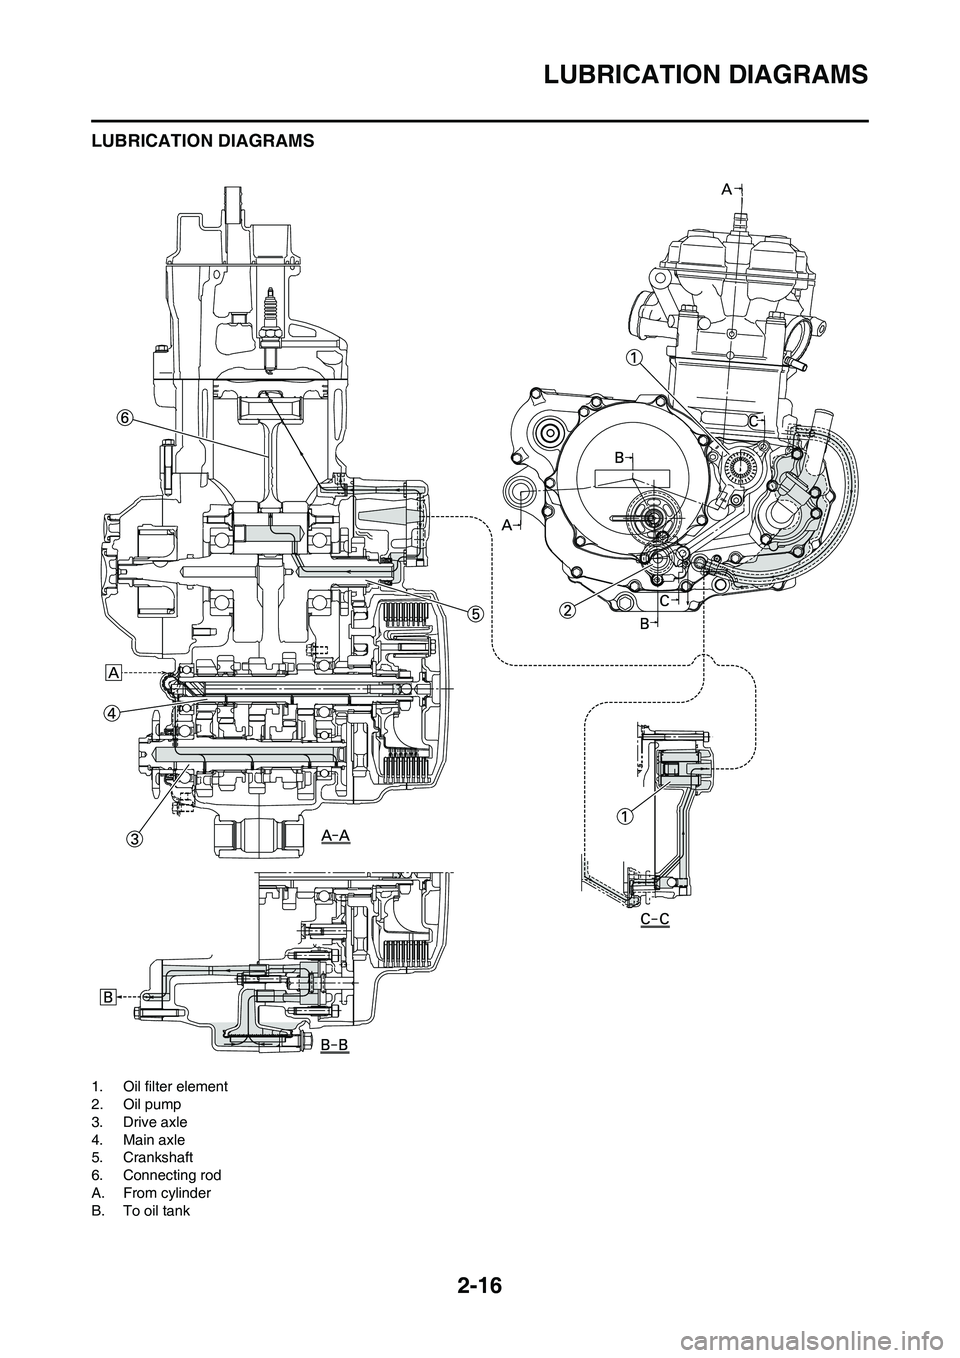 YAMAHA YZ450F 2009 Owners Guide 2-16
LUBRICATION DIAGRAMS
LUBRICATION DIAGRAMS
1. Oil filter element
2. Oil pump
3. Drive axle
4. Main axle
5. Crankshaft
6. Connecting rod
A. From cylinder
B. To oil tank 